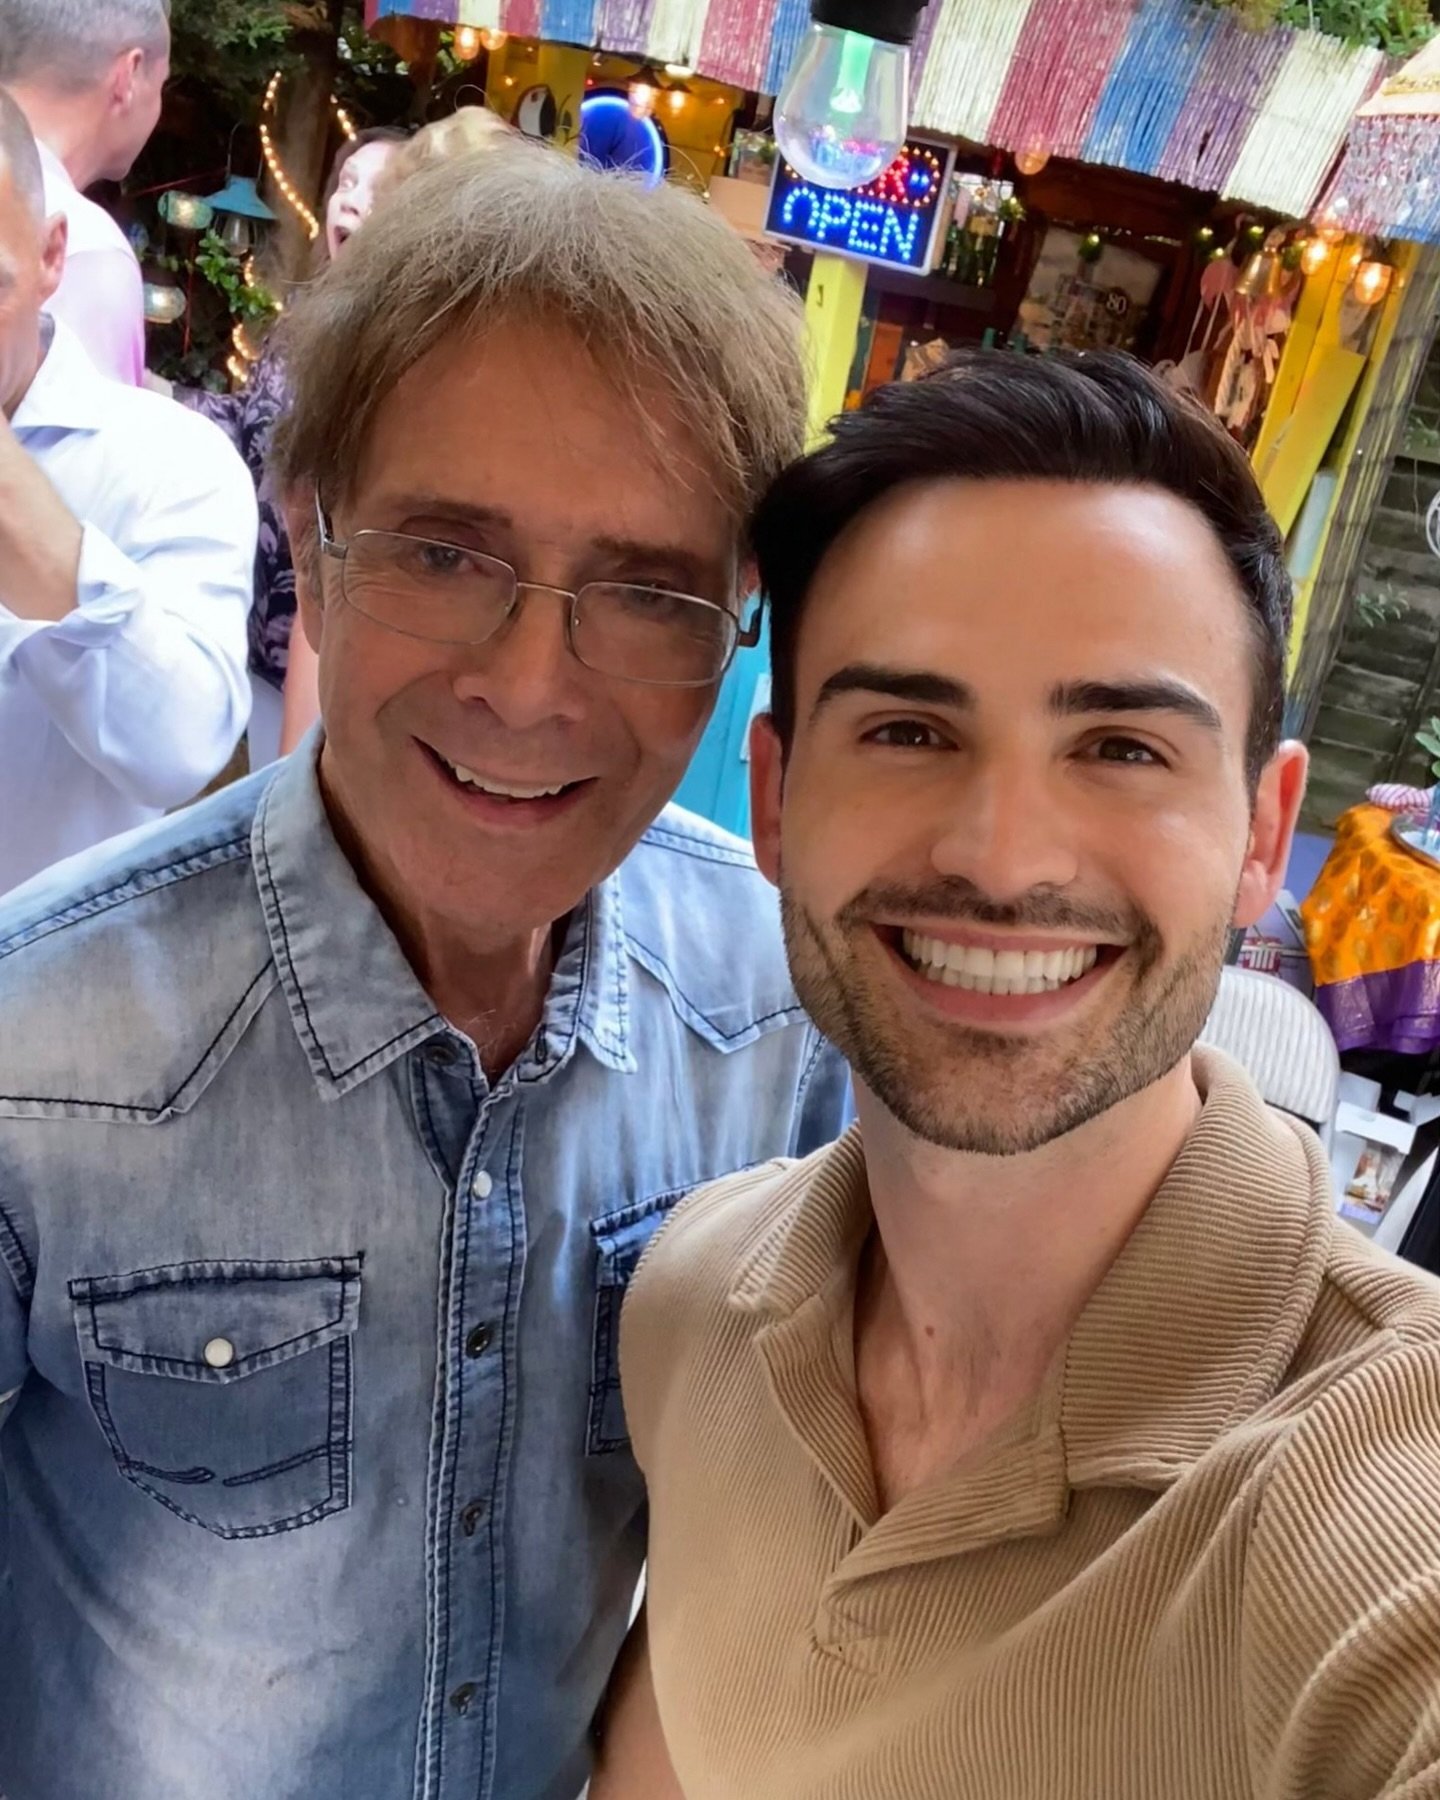 Throwback to last Summer when Sir Cliff &amp; I first discussed my show ideas! This Saturday they become reality at the @loginlounge get your tickets now!! 🙌🏼🙌🏼🙌🏼
What&rsquo;s your favourite Cliff Richard song?? Comment below 👇🏼